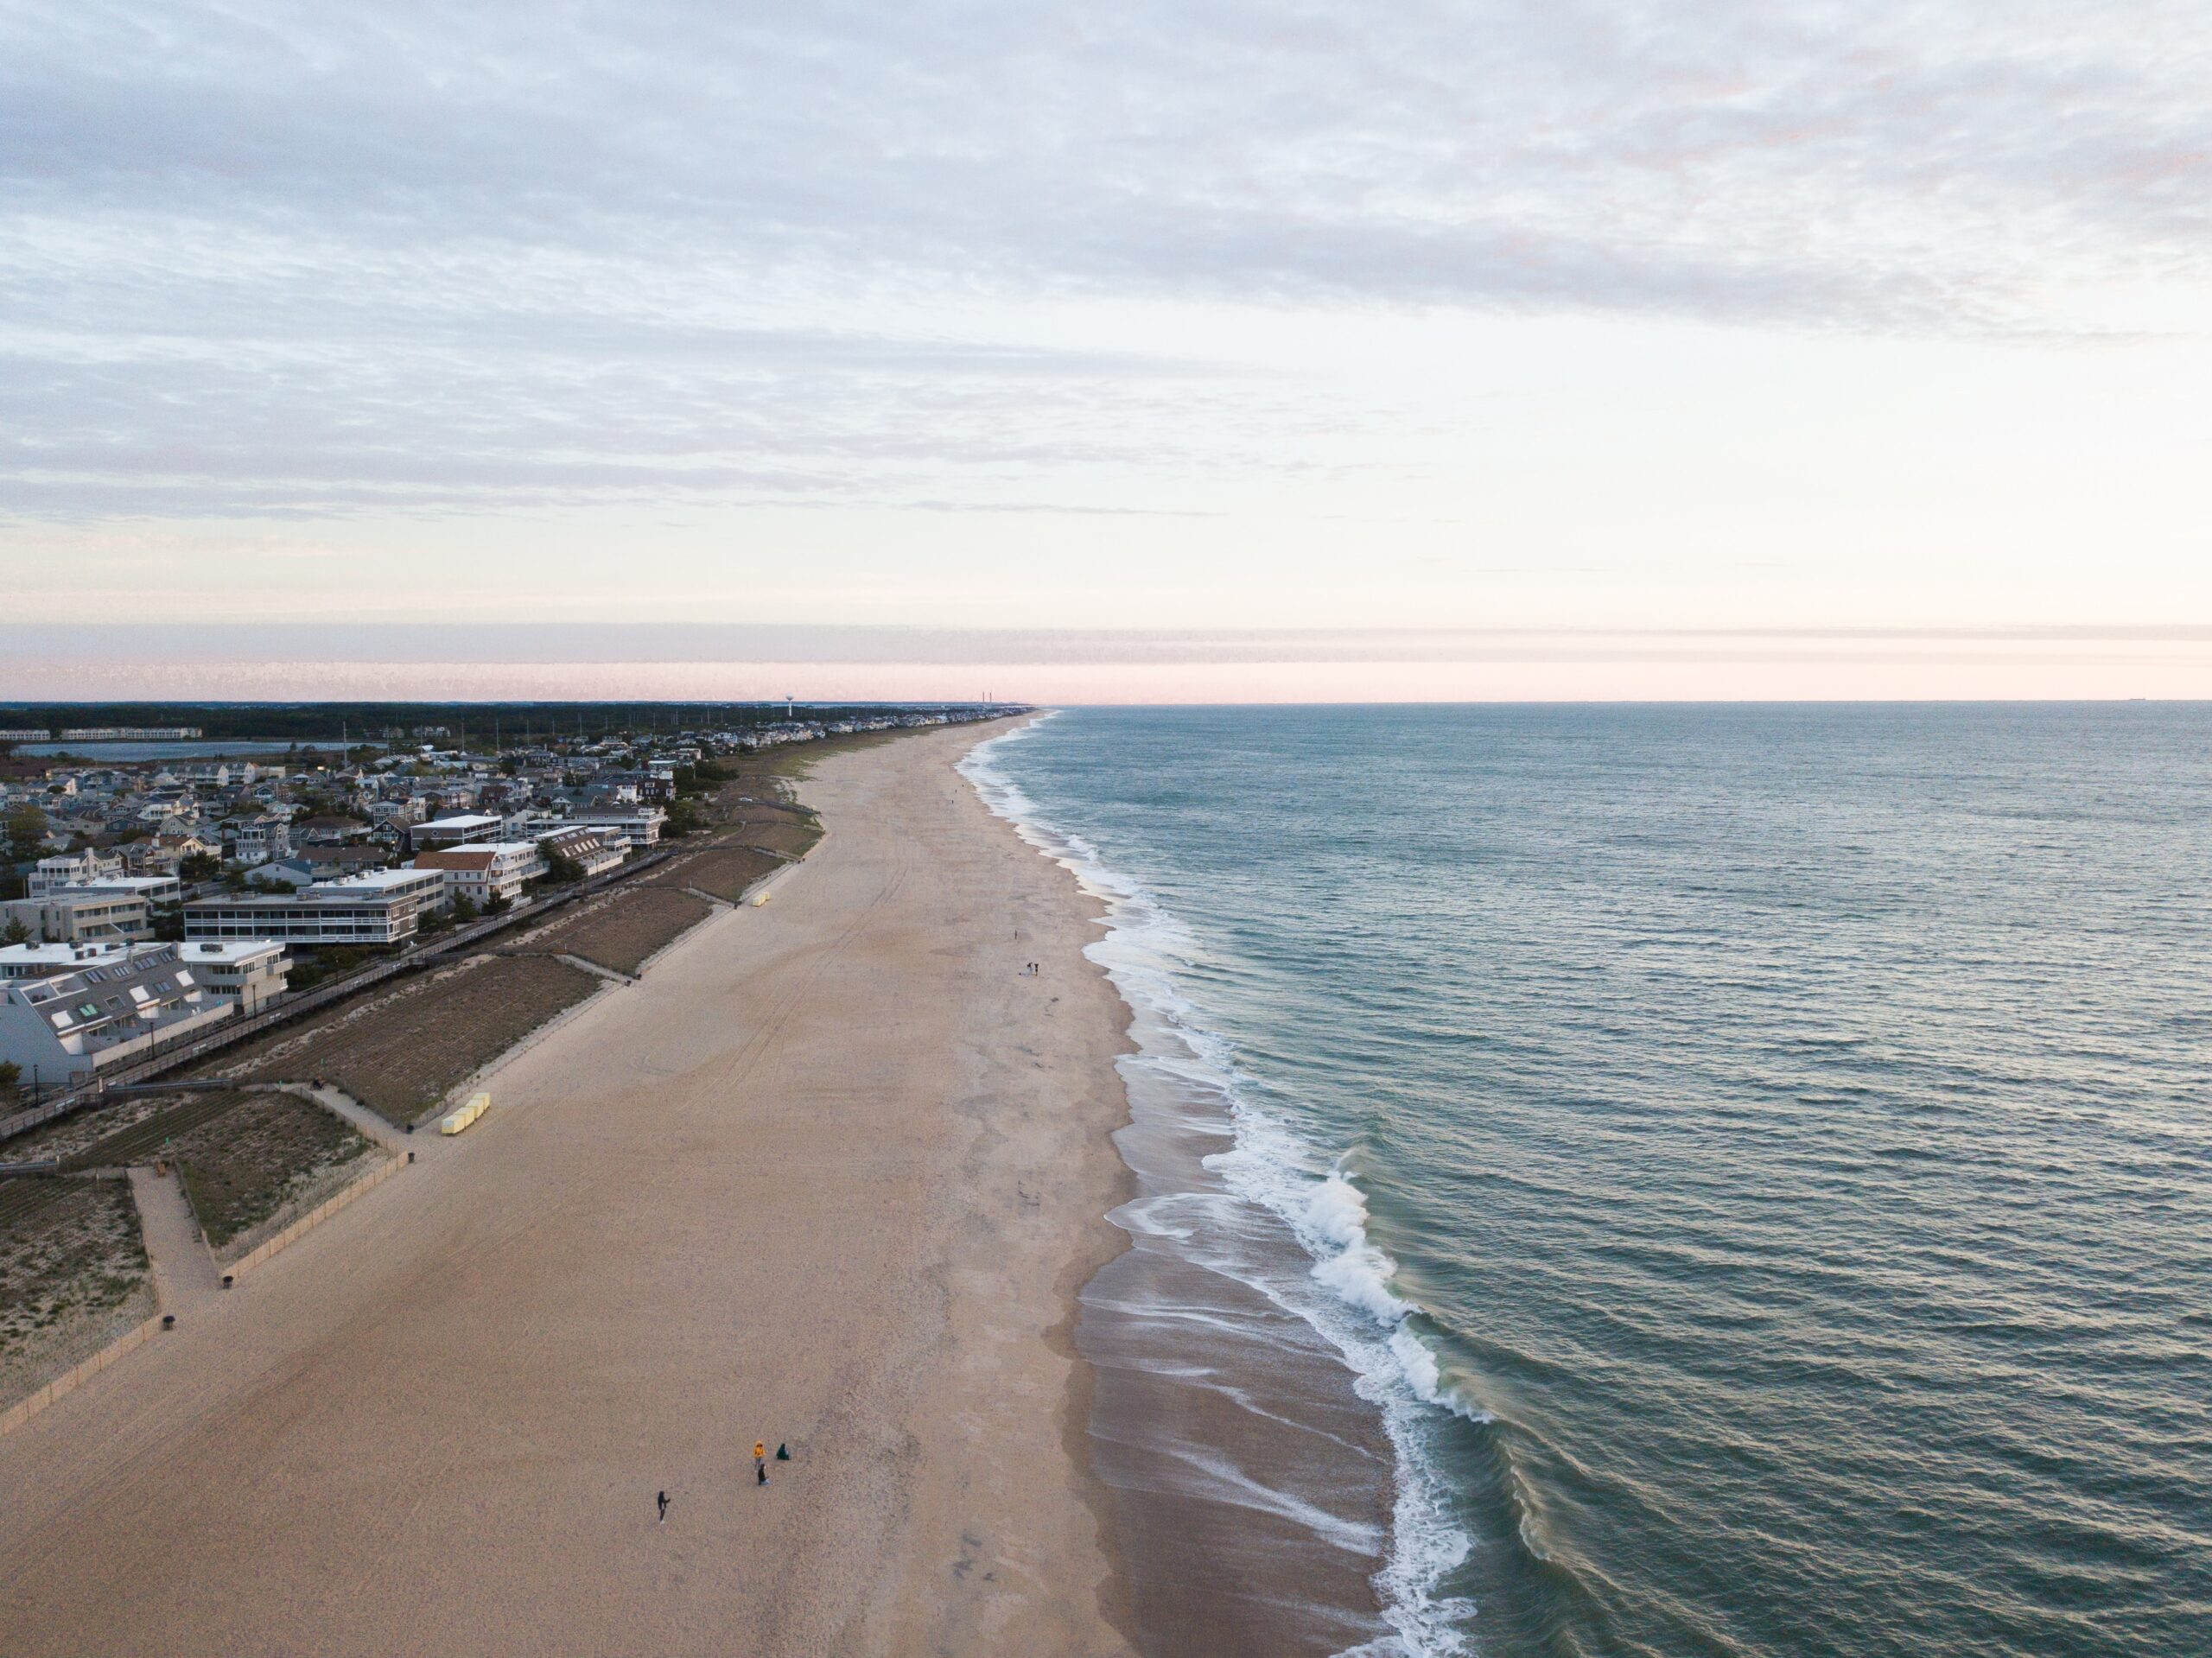 Rehoboth Beach in Delaware is one of the best places to live for those who enjoy the beach and tourist attractions. Pictured: A beach in Delaware.